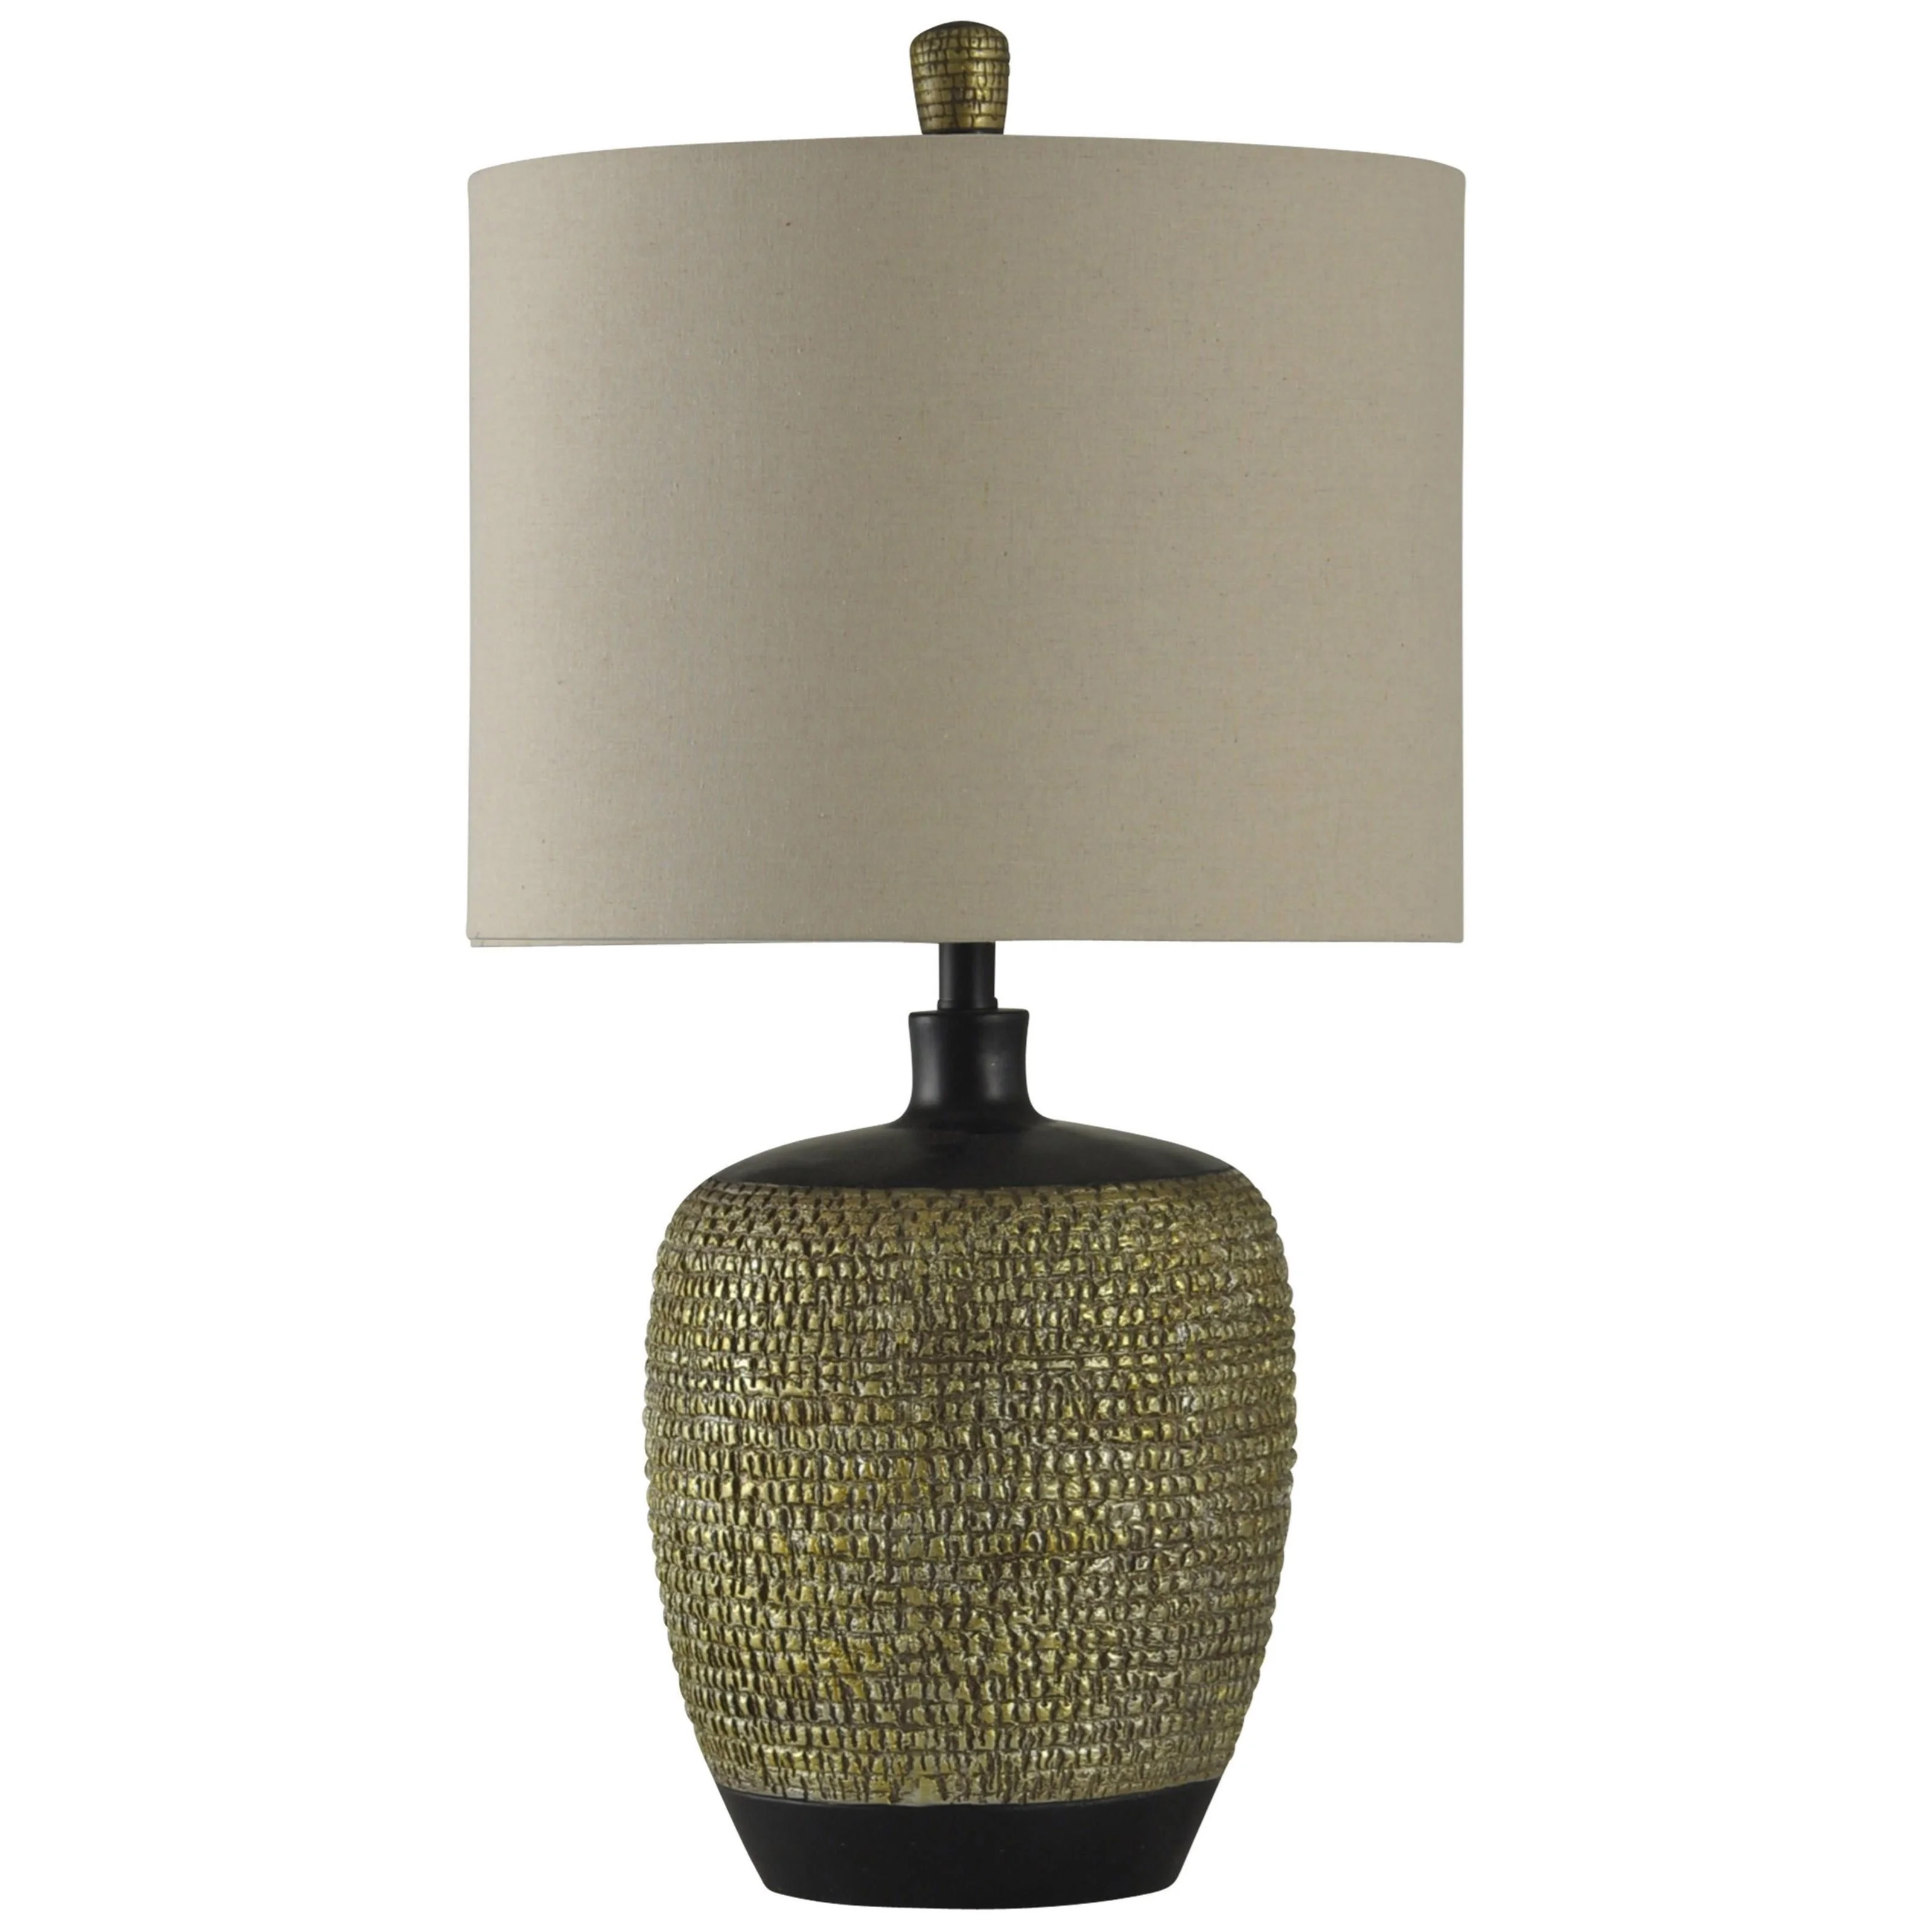 StyleCraft Lamps L310147 Gold and Black Barrel Lamp | Swann's Furniture ...